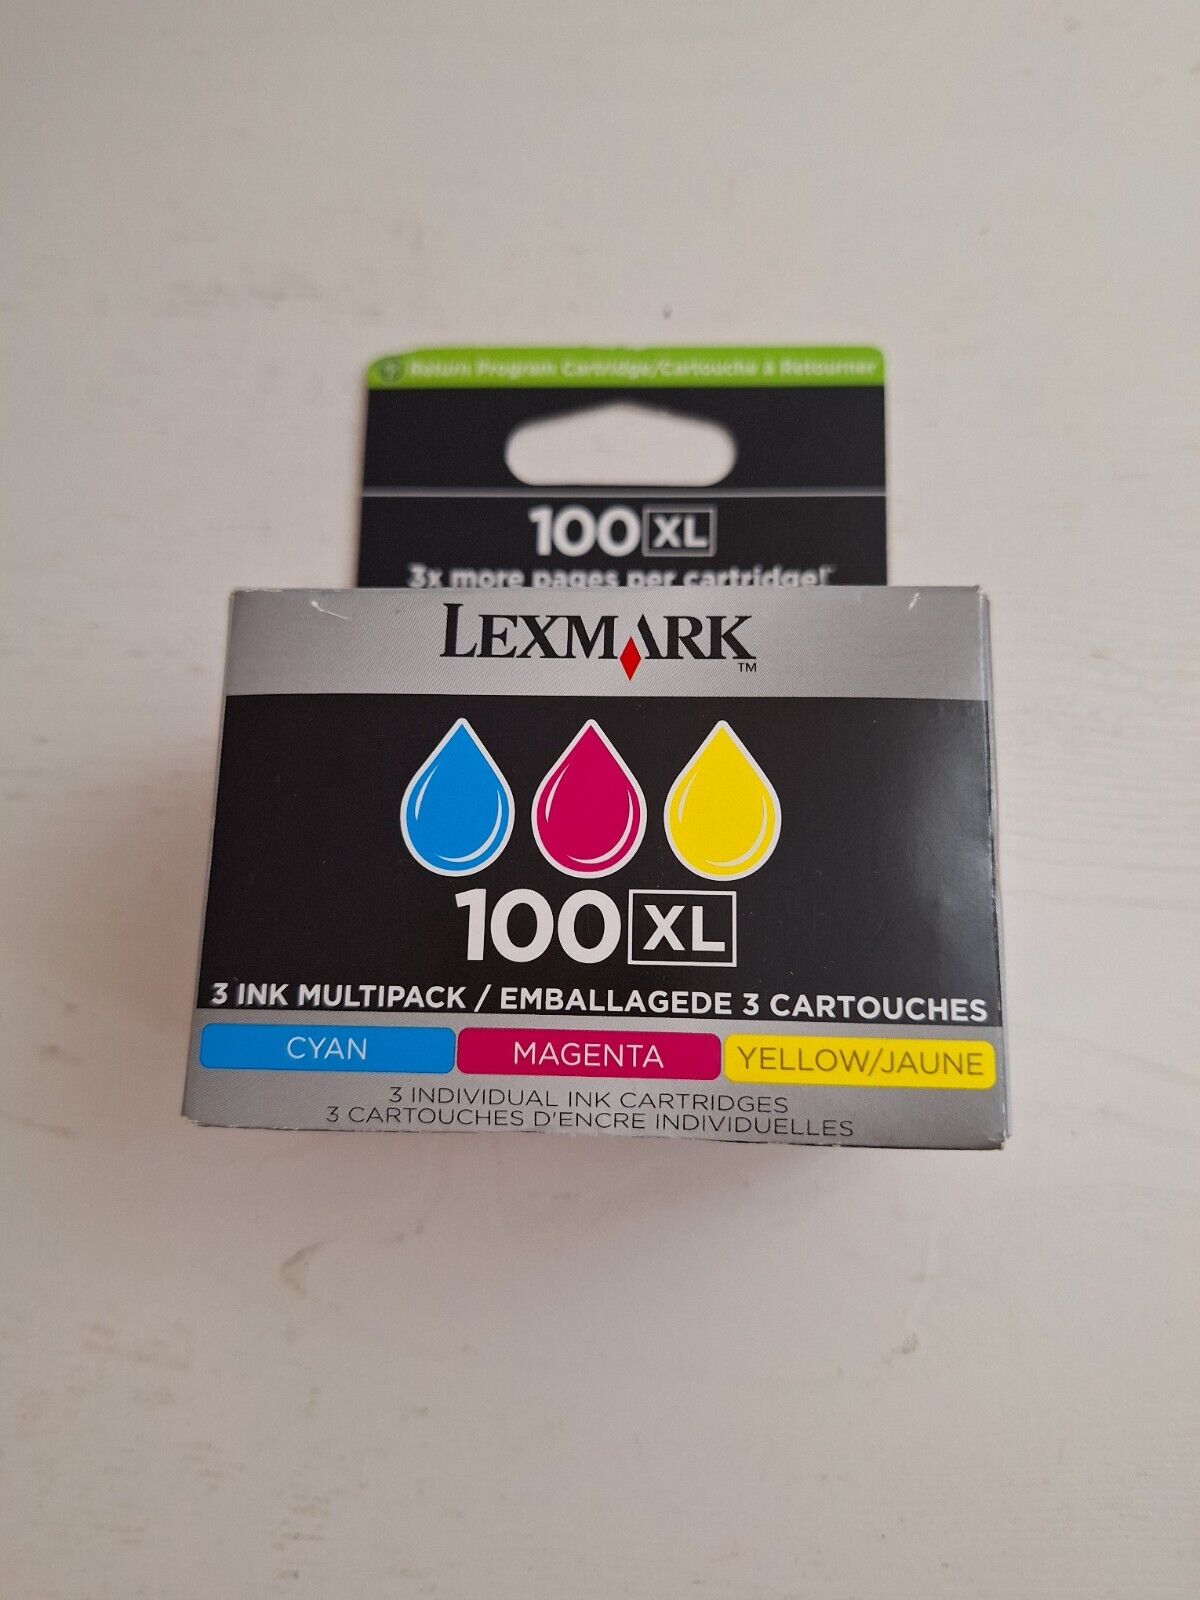 Lexmark 100XL 3 Ink Multipack 3-Color Cartridges Cyan Yellow Magenta NEW (F)